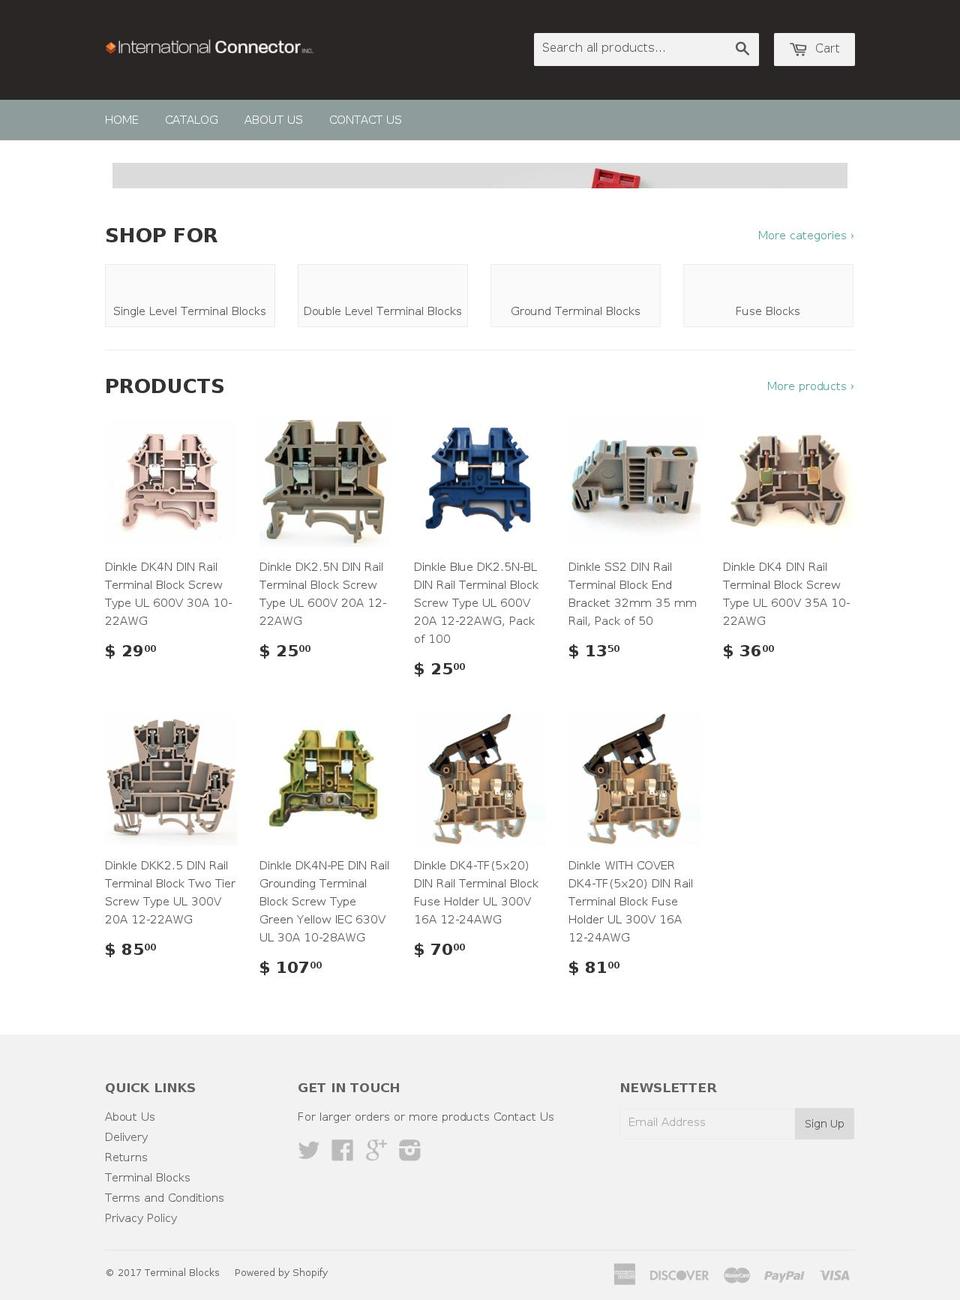 ELECTRO Shopify theme site example intconnector.com